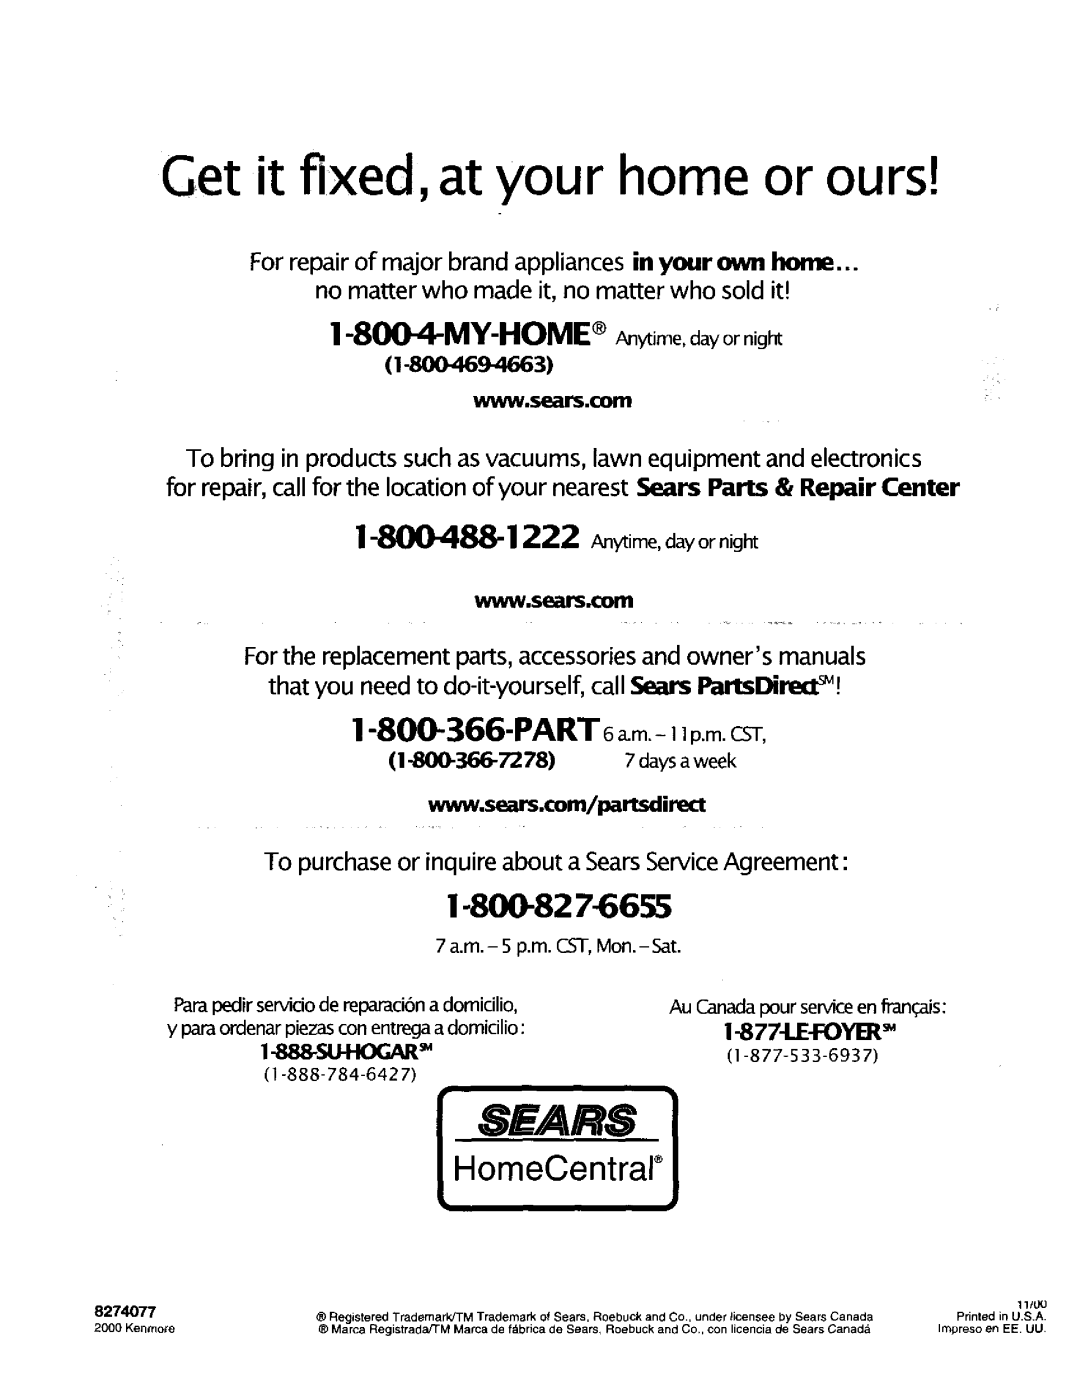 Kenmore 665.75025, 665.75029, 665.72024 manual HomeCentralSEARS, 1-88&SU-I-IOGAR, Le-Foyi, Get it fixed, at your home or ours 